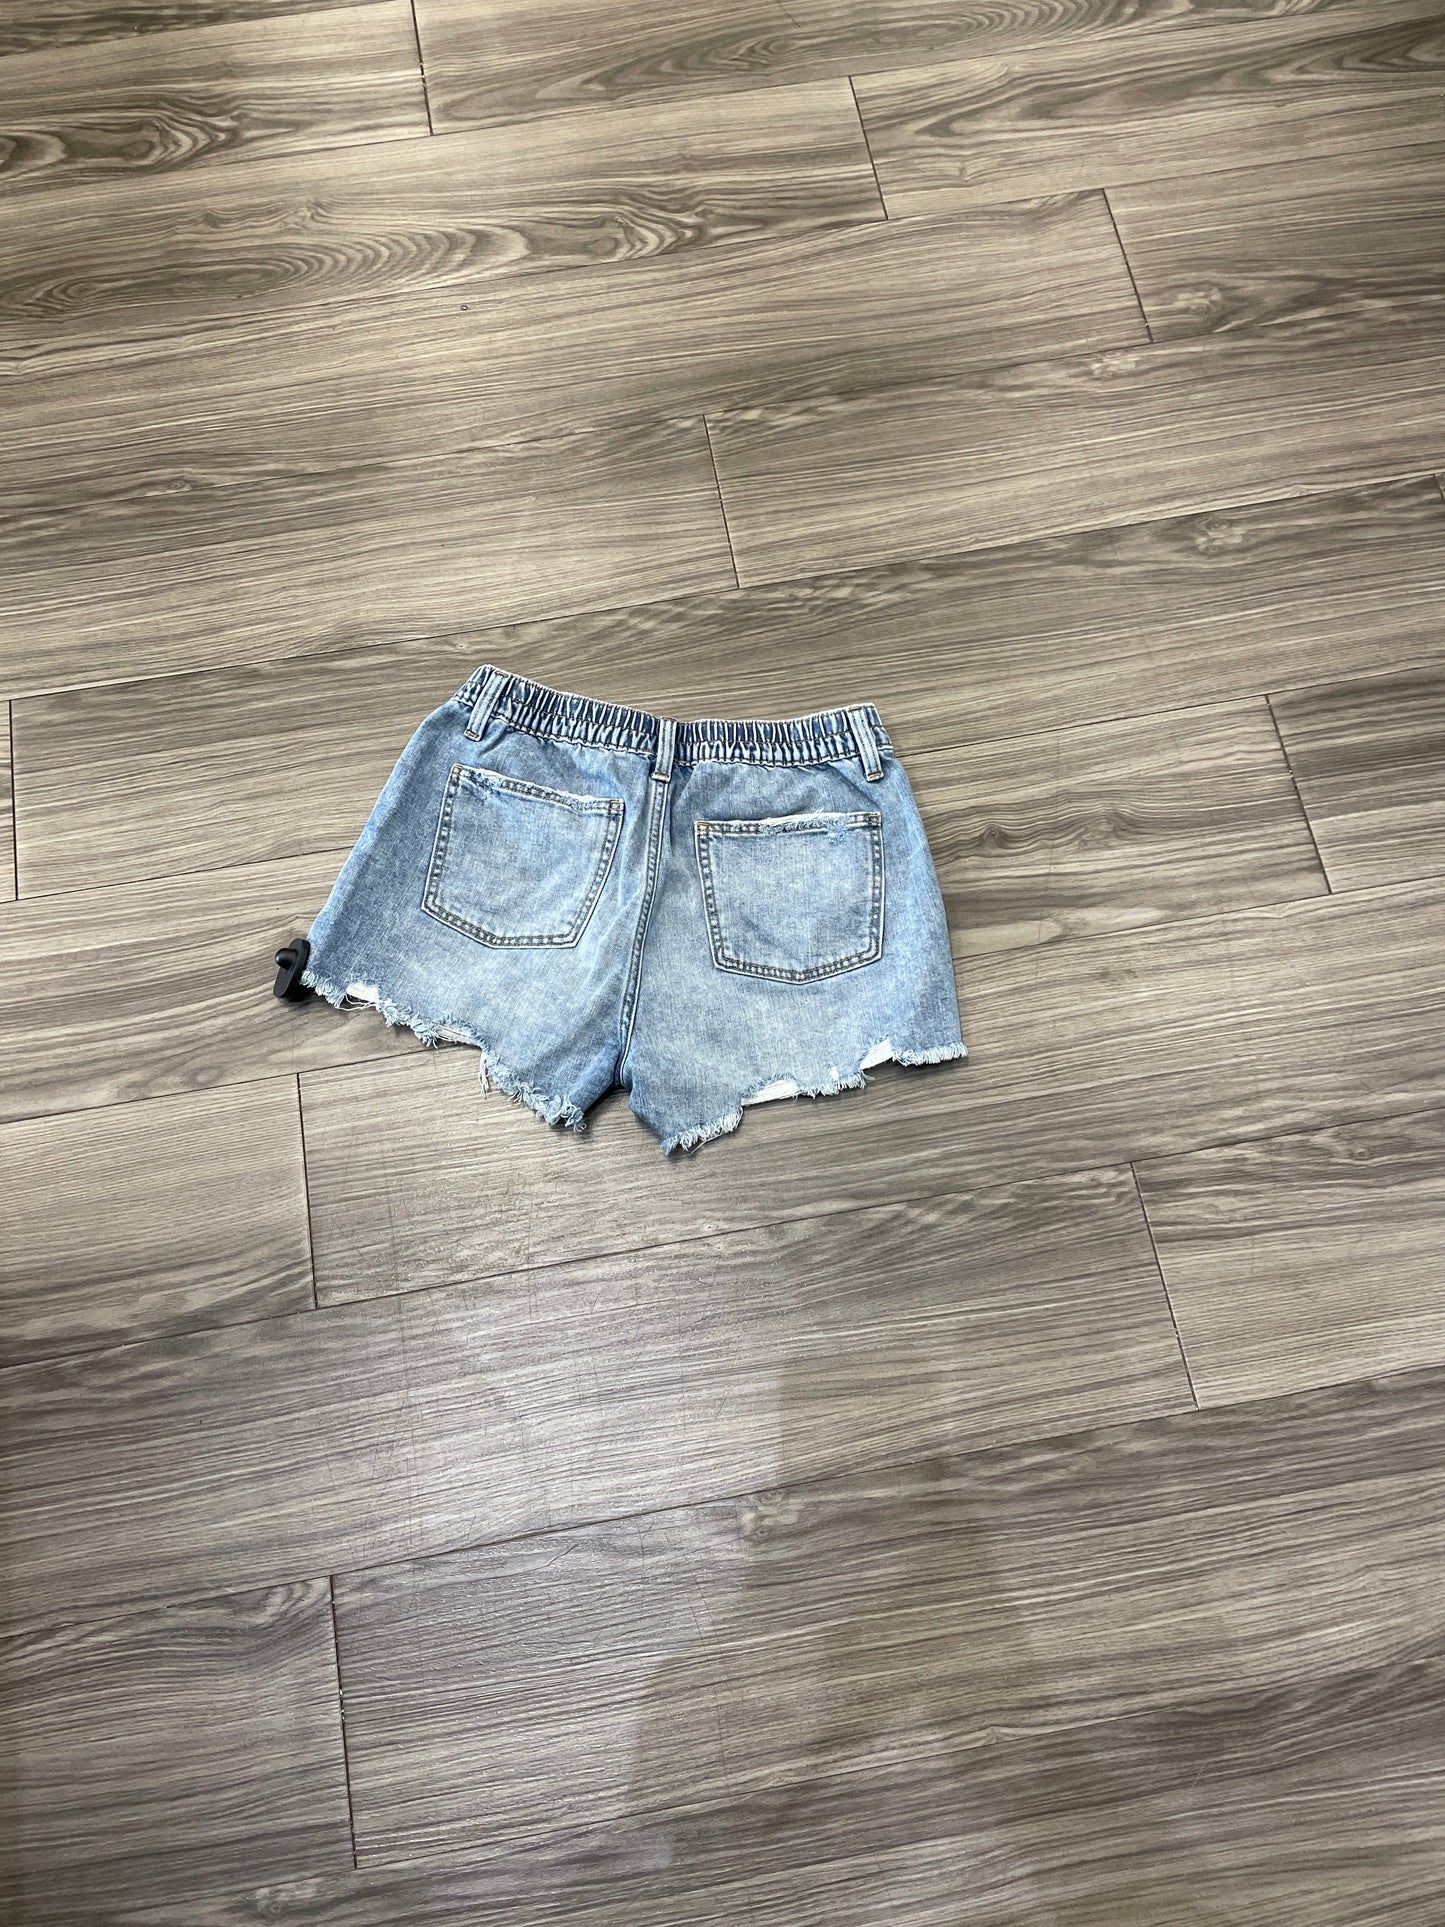 Shorts By Aerie  Size: S